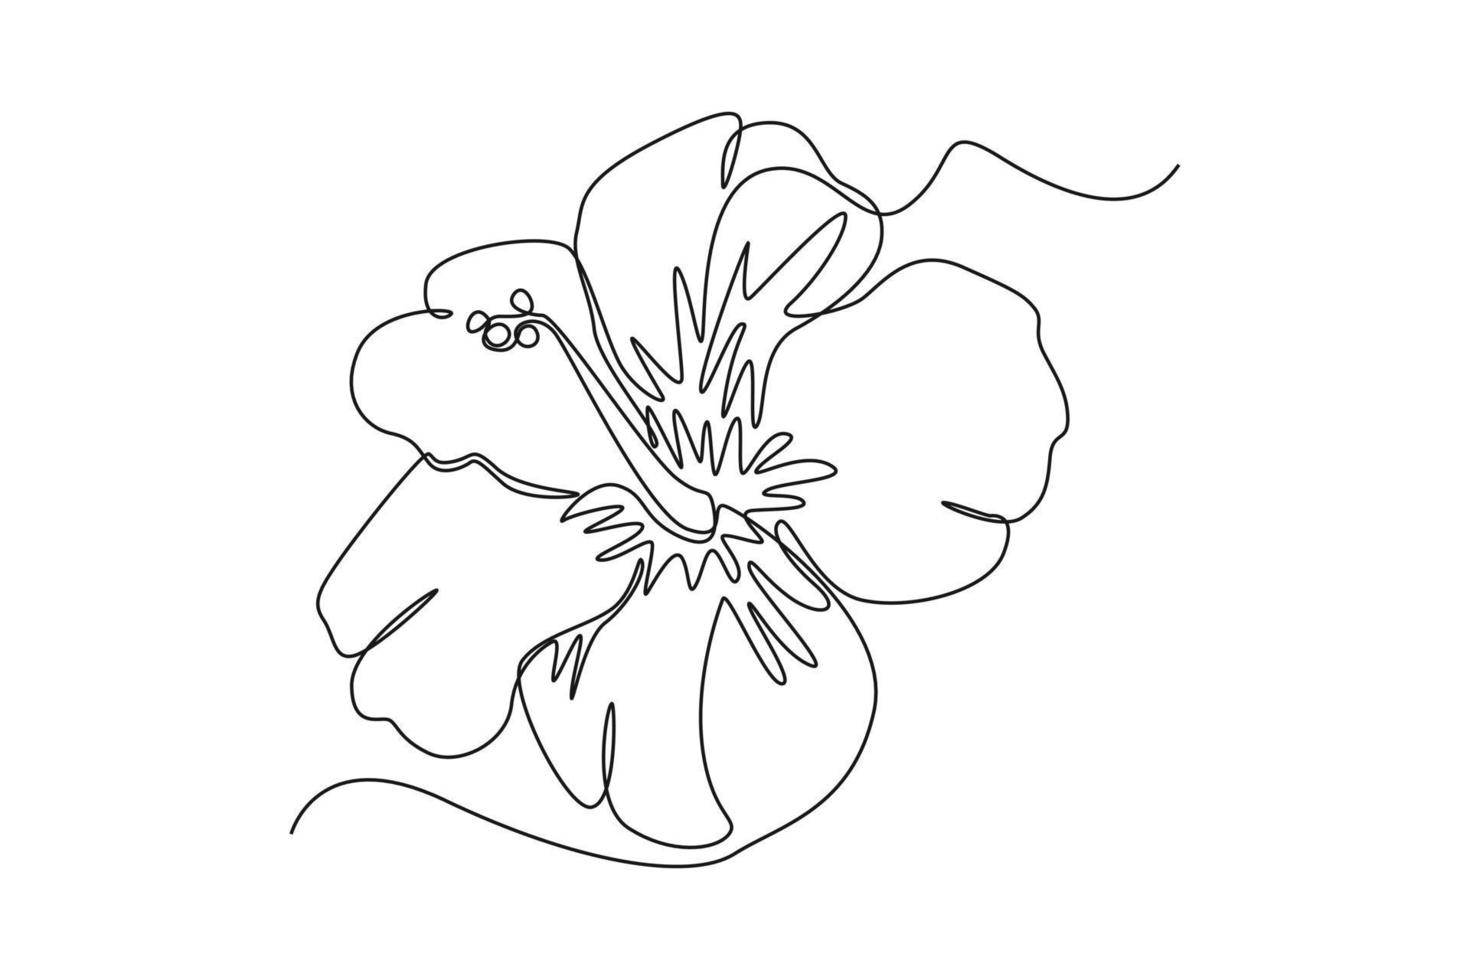 Single one line drawing Hibiscus Flower. Beautiful flower concept. Continuous line draw design graphic vector illustration.